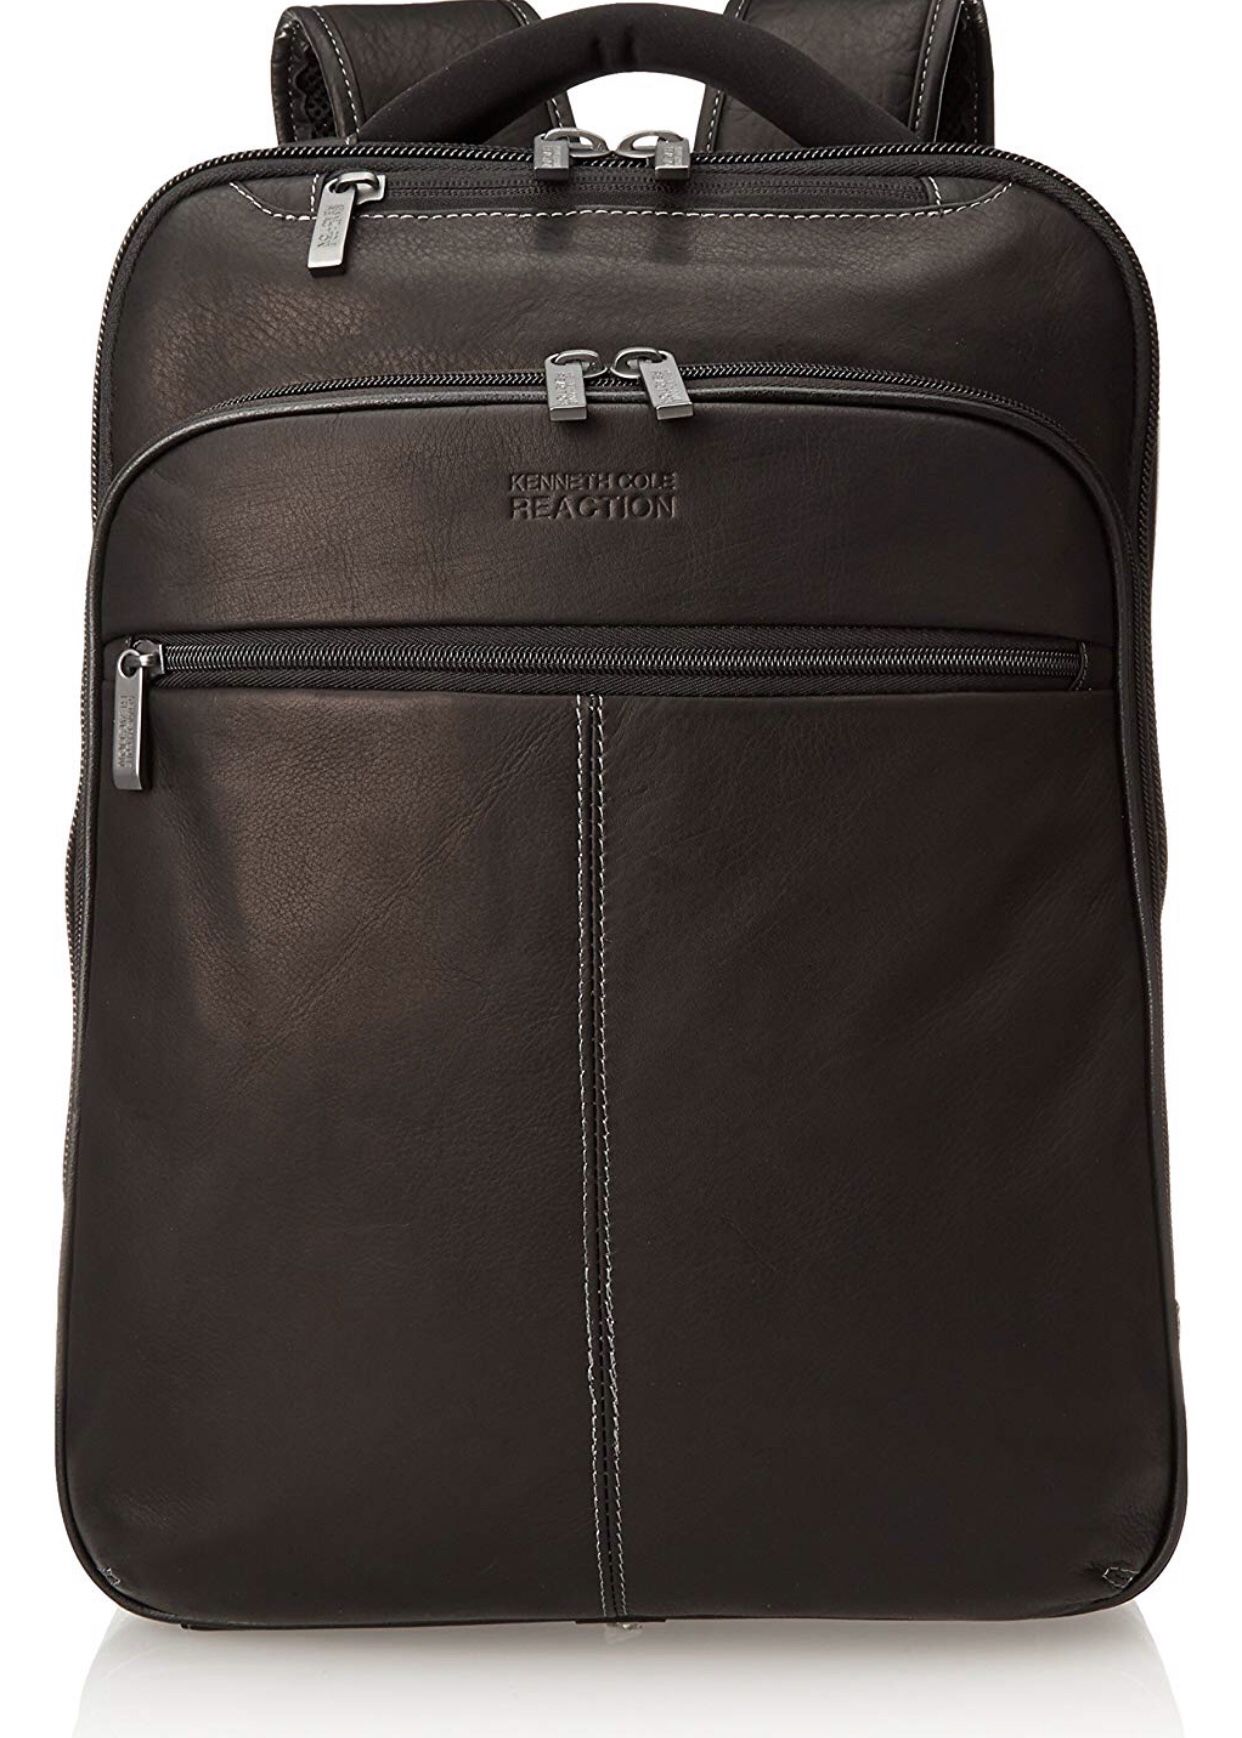 Kenneth Cole reaction men’s backpack leather